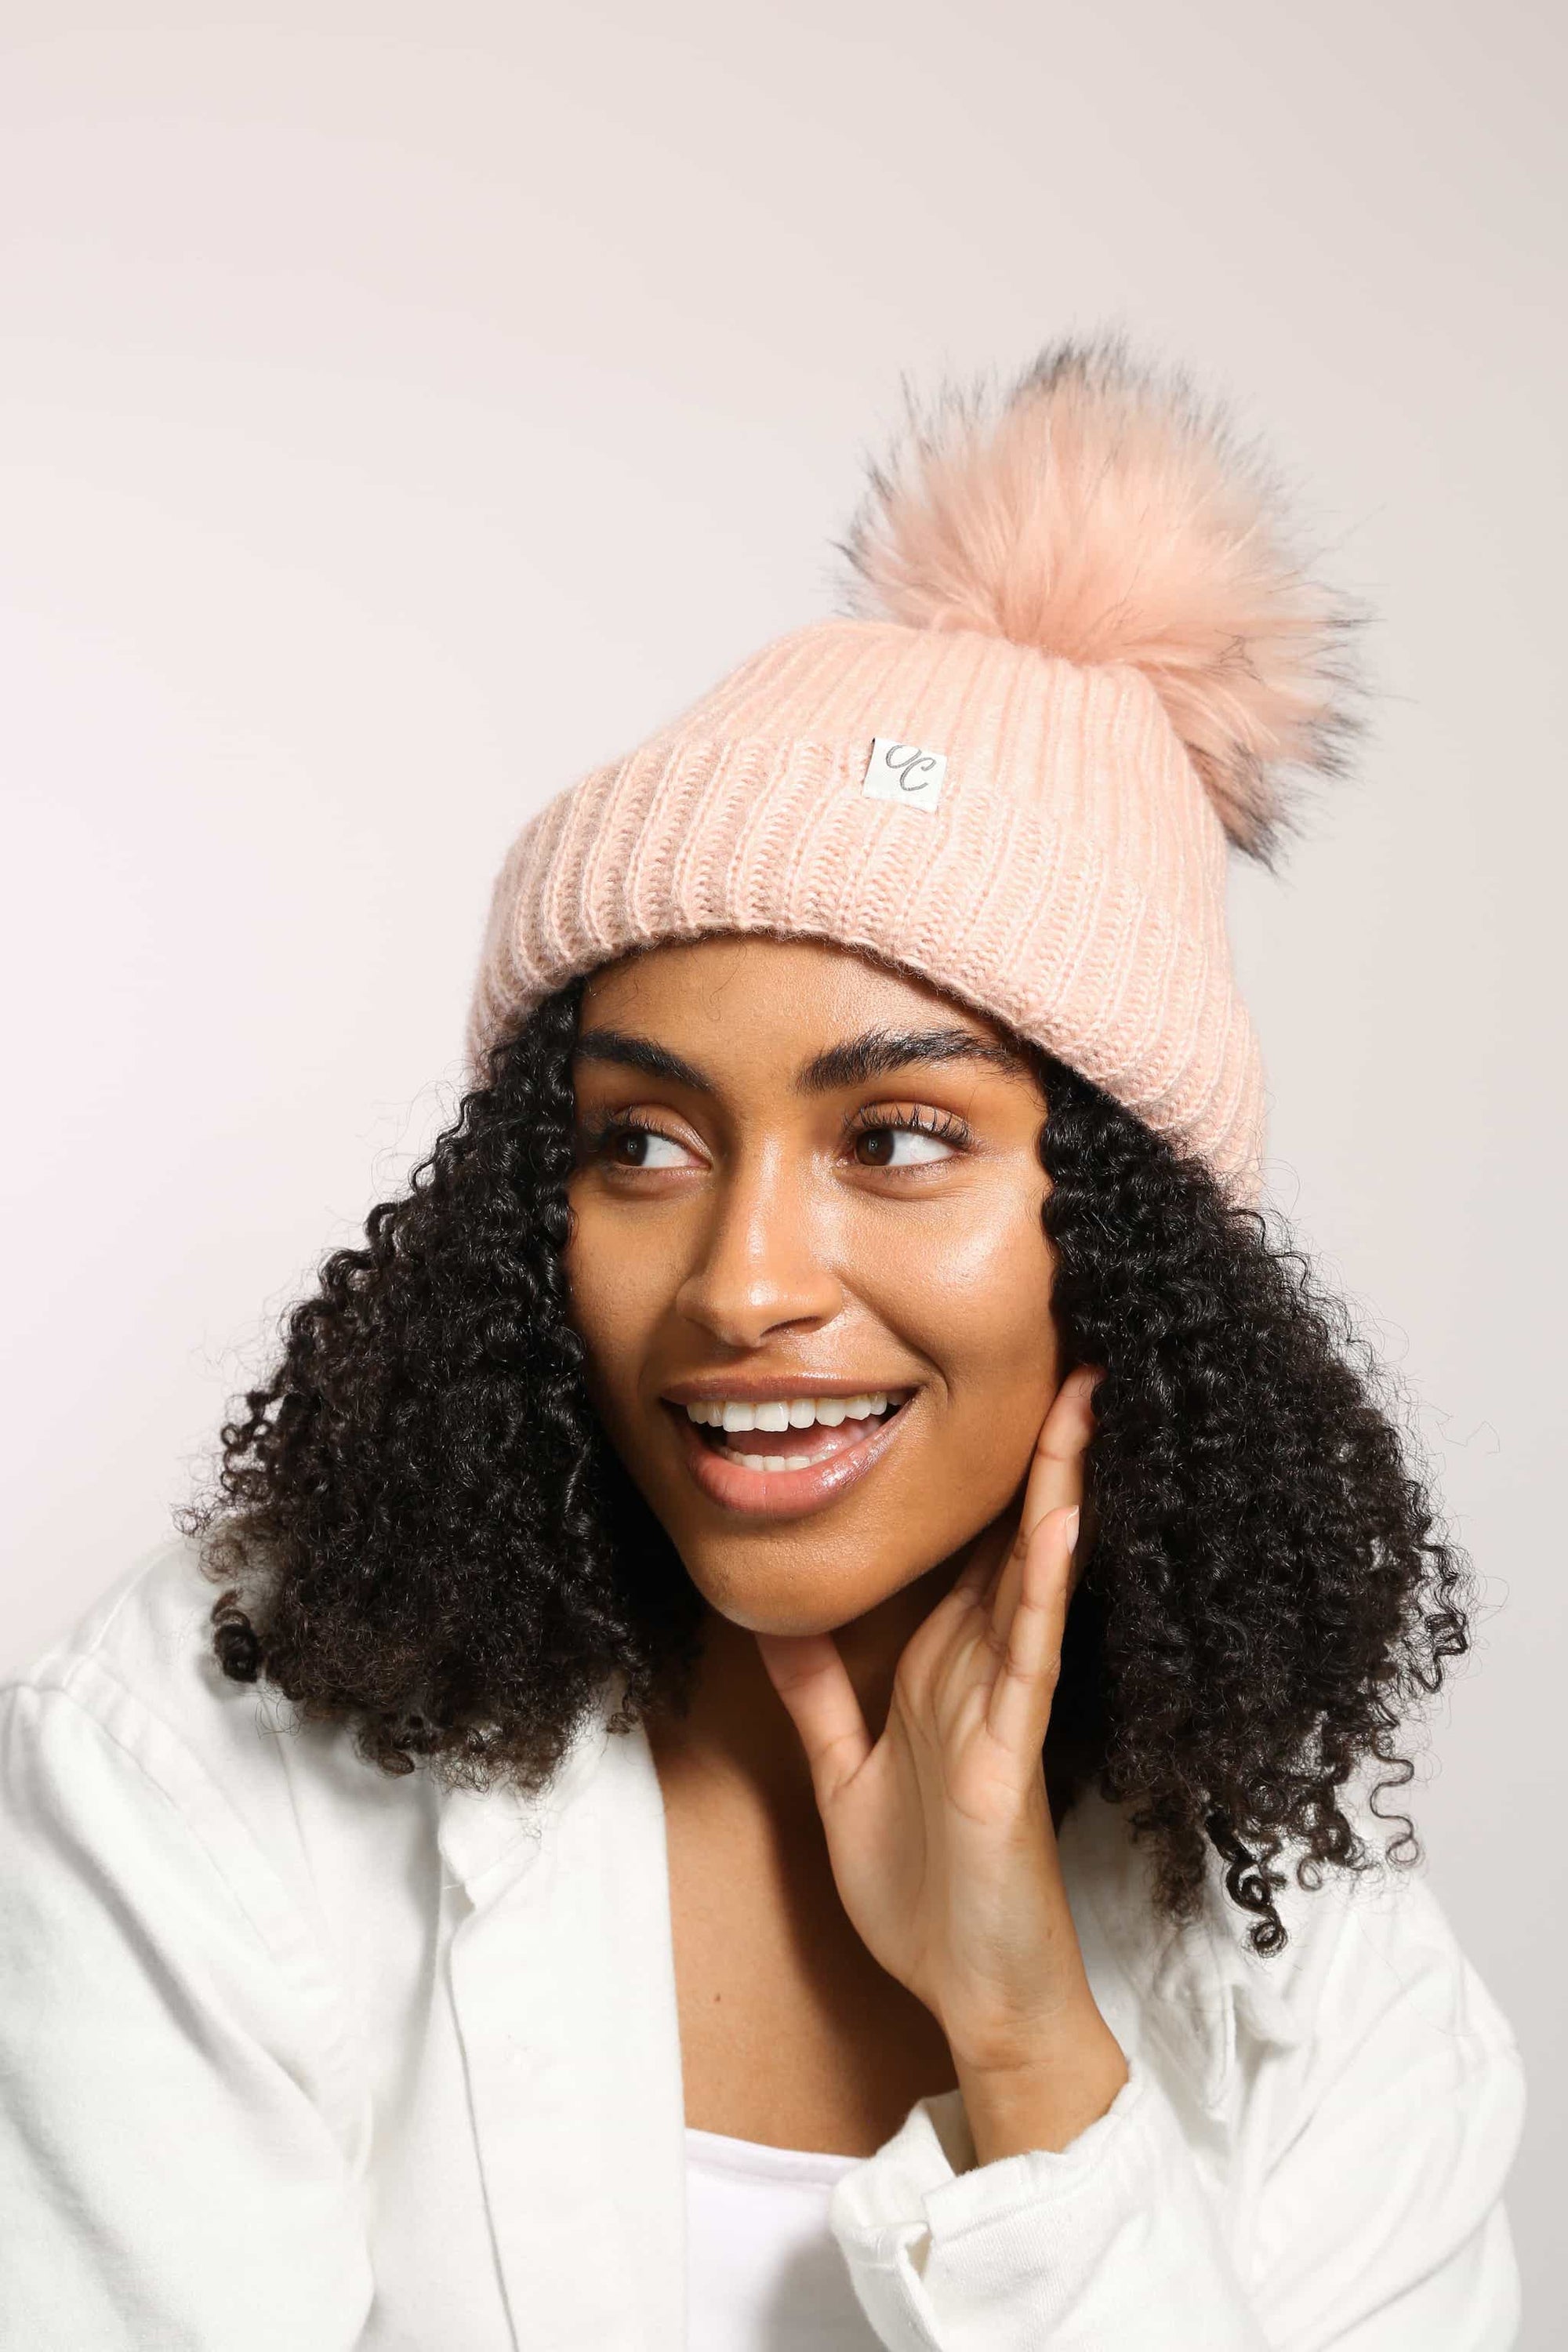 Only Curls Winter Hats - Satin lined beanies